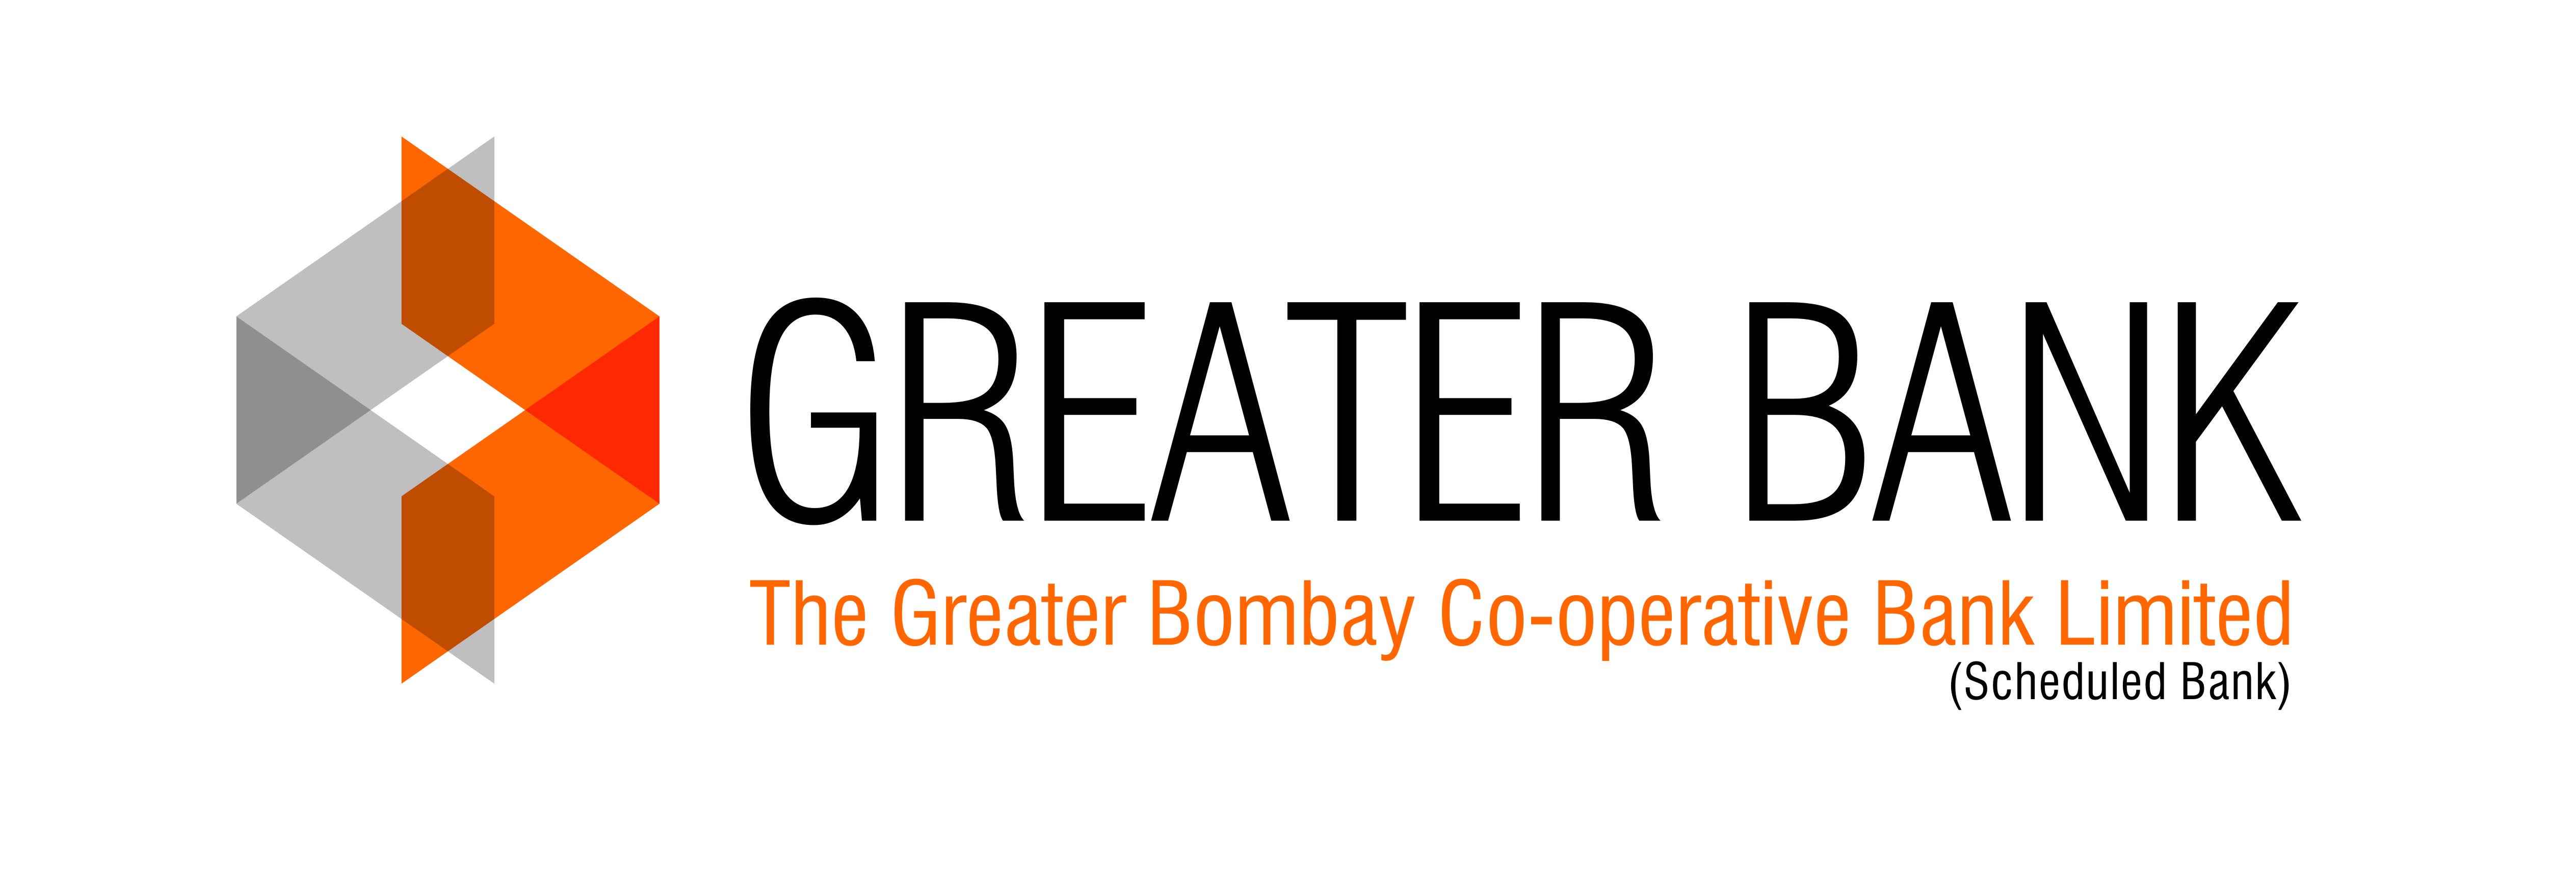 THE GREATER BOMBAY COOPERATIVE BANK LIMITED